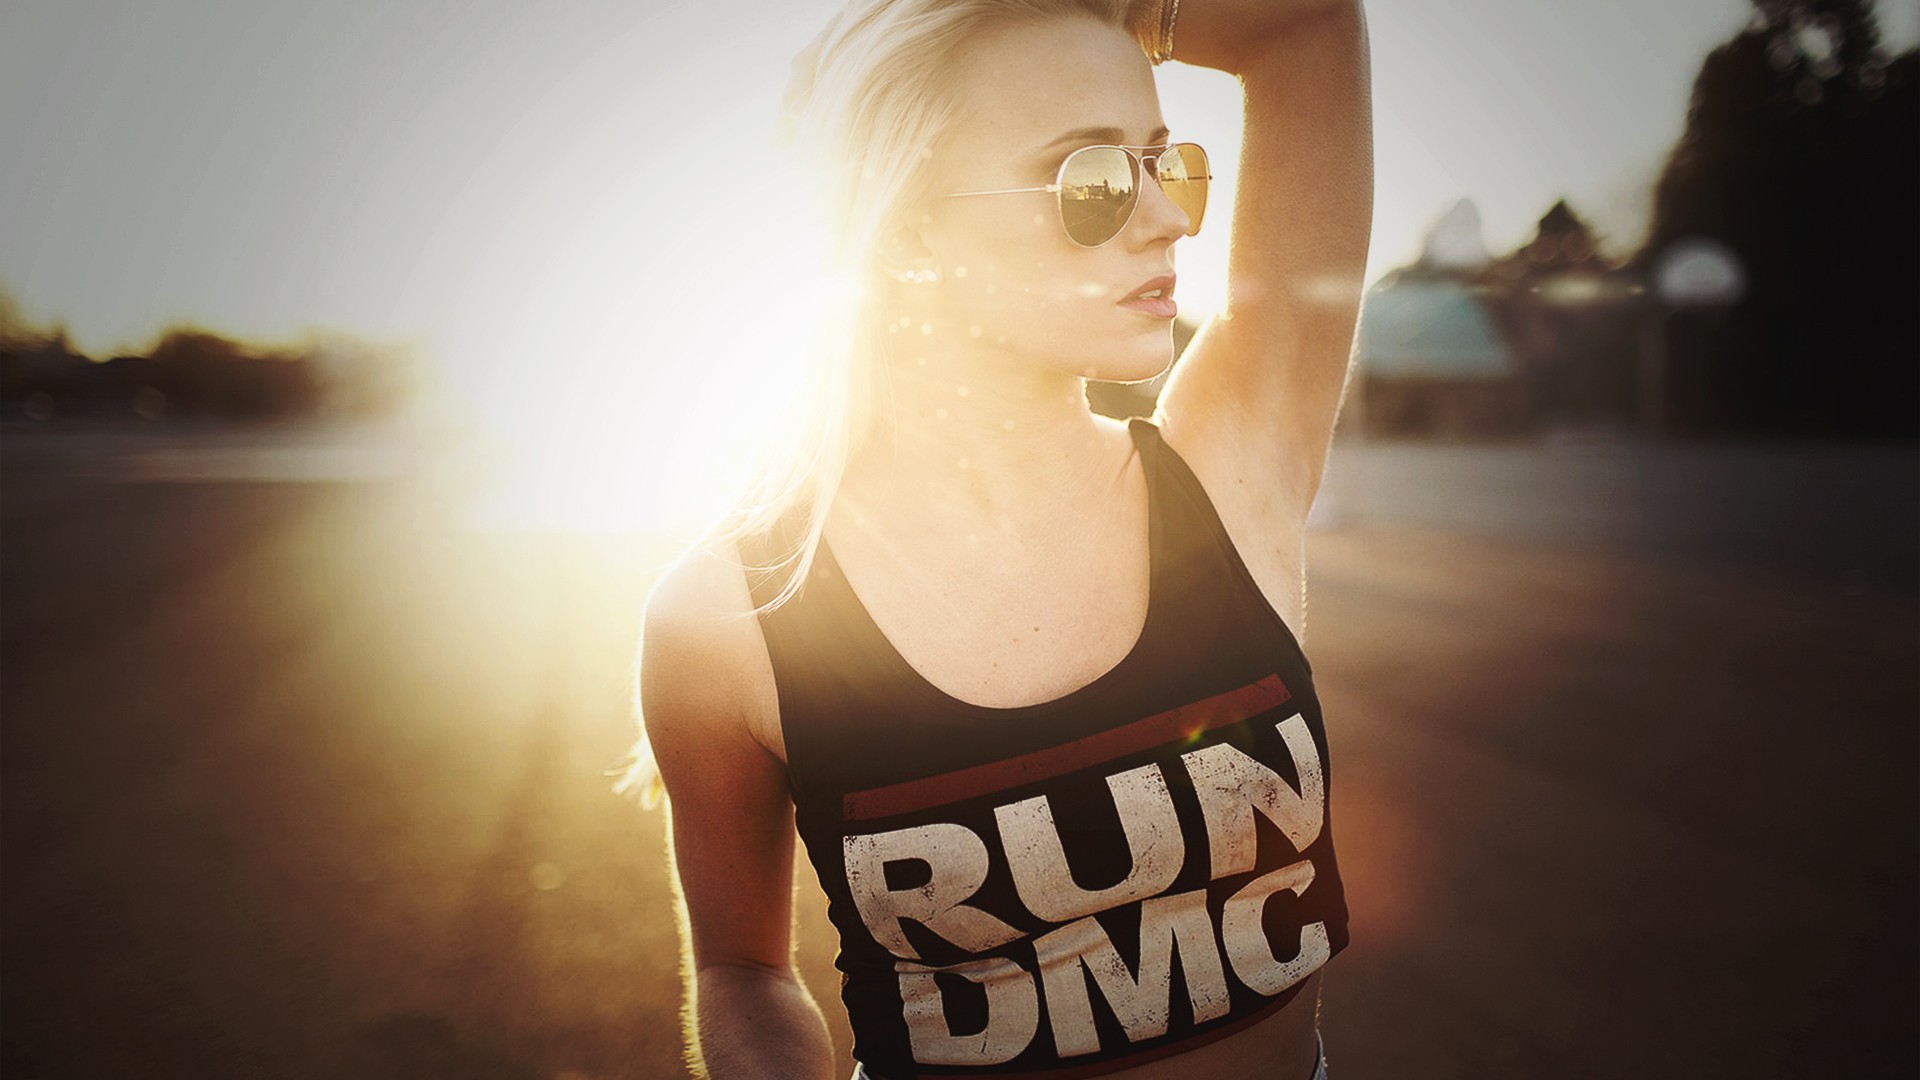 People 1920x1080 women blonde sun rays sunglasses women with glasses hands on head women outdoors sunlight women with shades arms up Run DMC